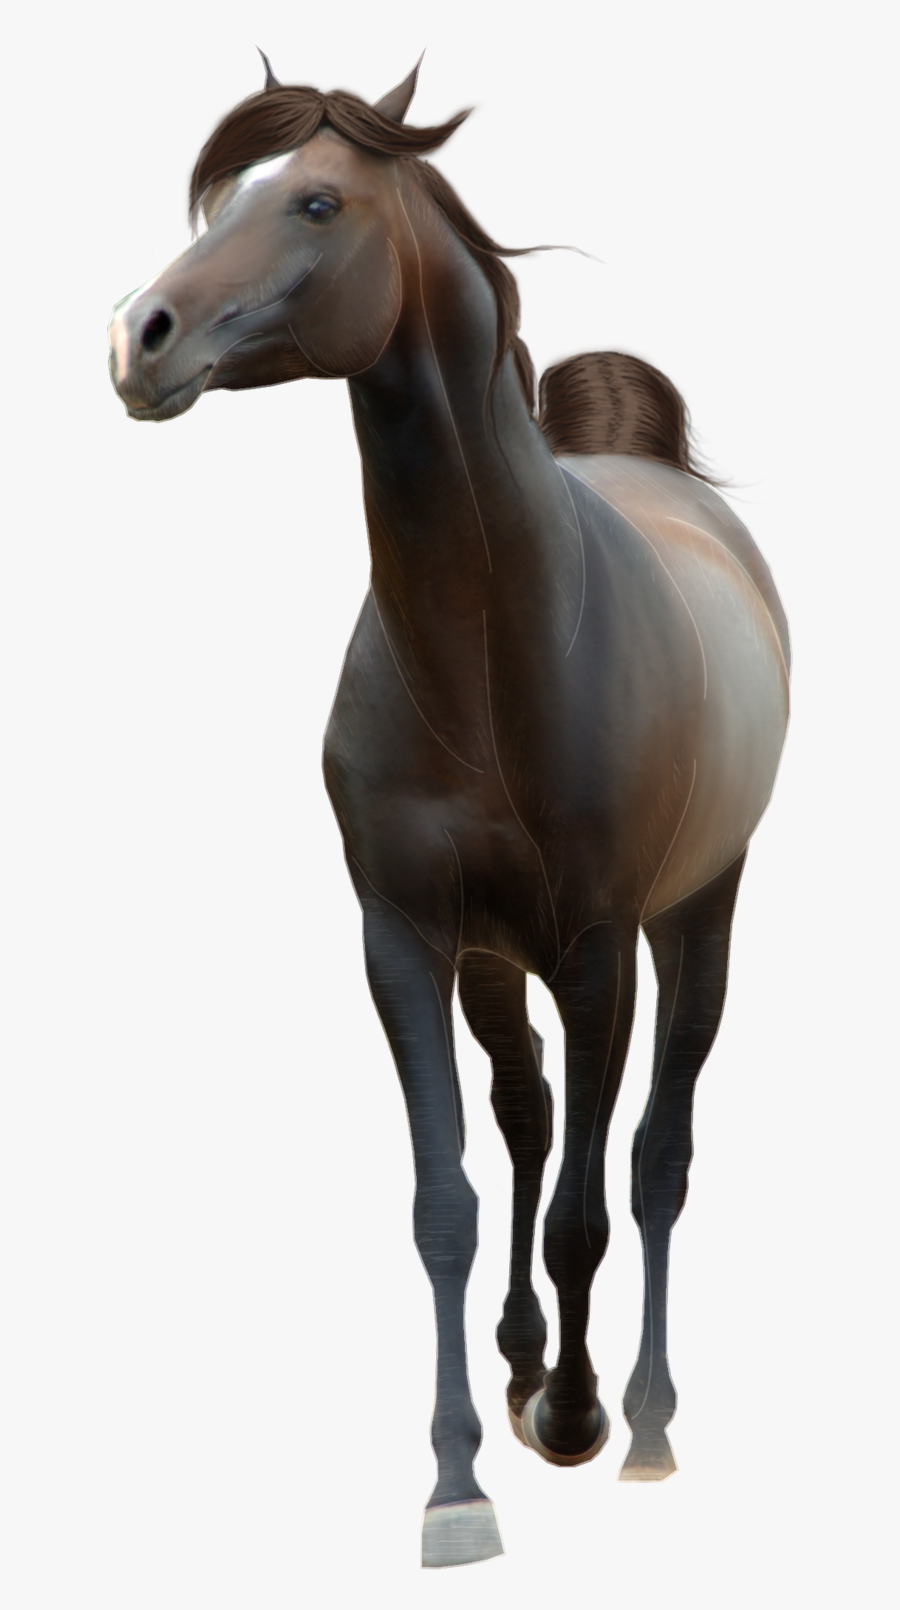 Black Horse Png Animal - Horse Png Hd Photos Download, Transparent Clipart